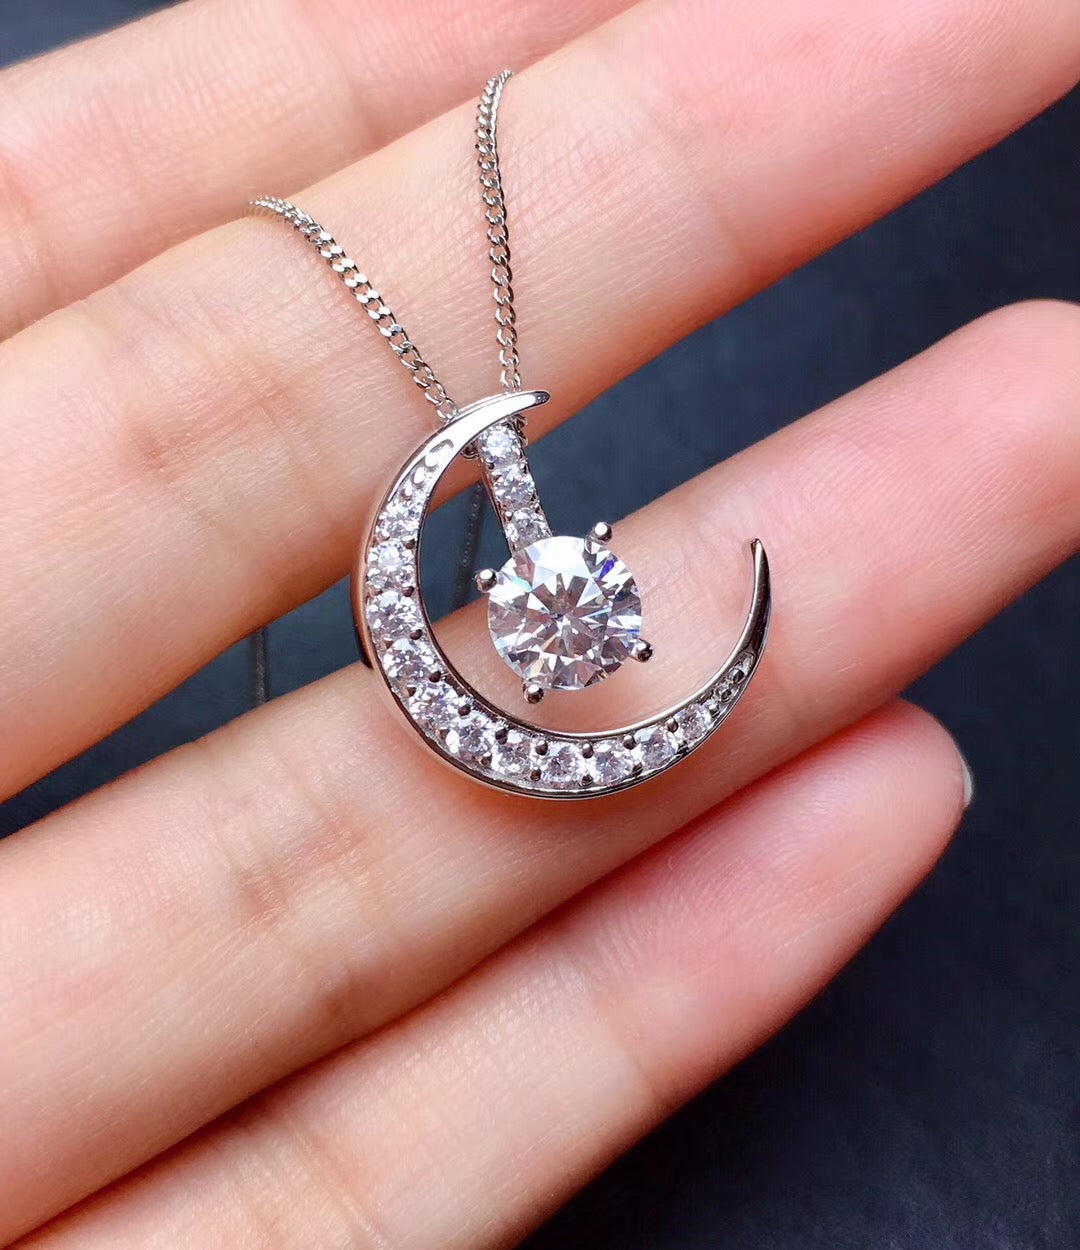 1 Carat Moissanite Moon and Star Pendant Necklace, Sterling Silver With 18K White Gold Plating, Handmade Engagement Gift  For Women Her